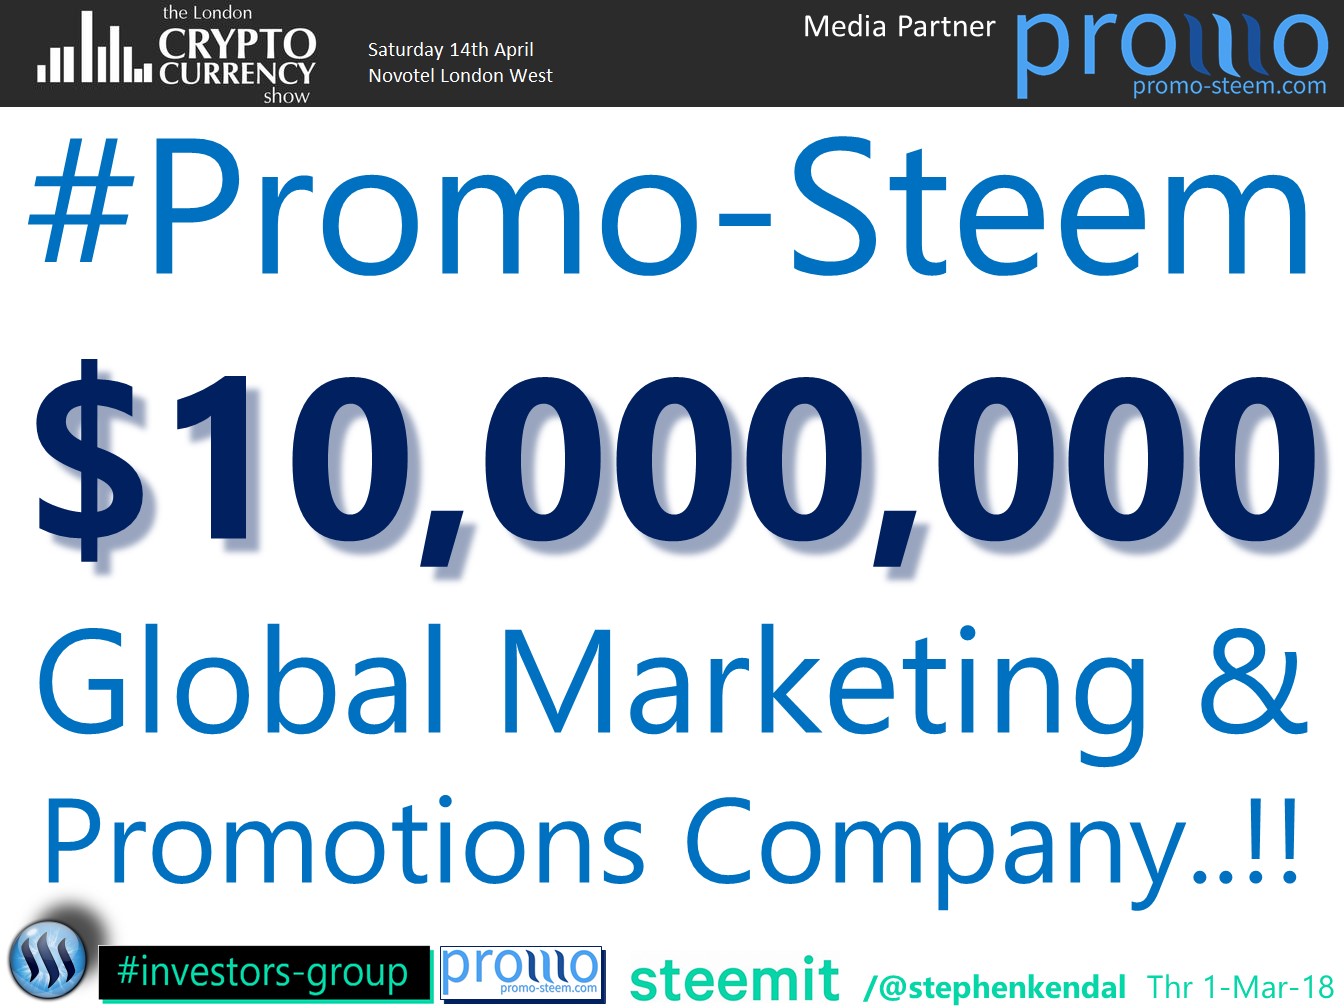 Promo-Steem - A $10,000,000 Global Marketing and Promotions Company.jpg